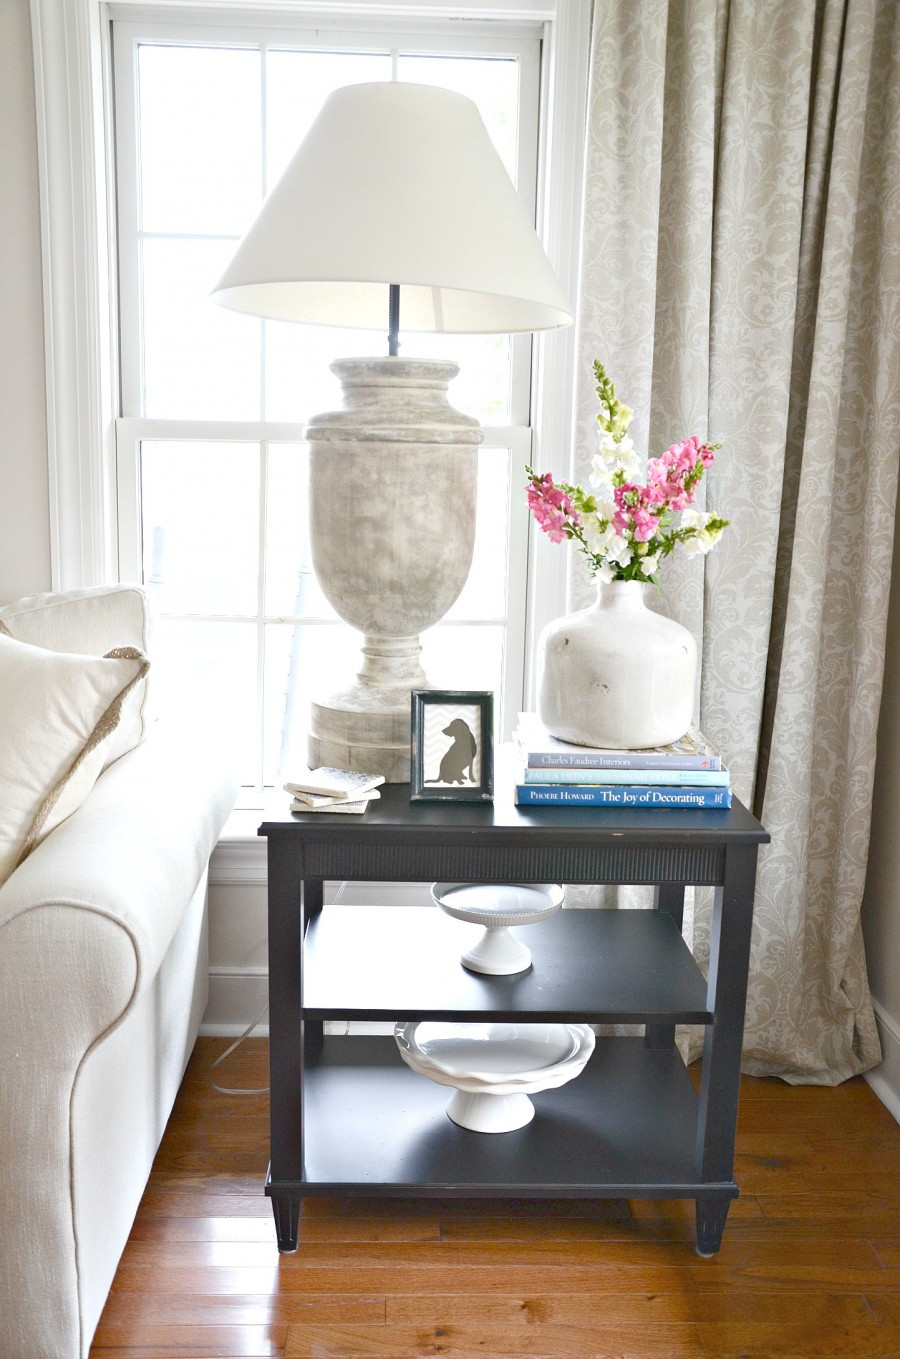 End Tables Living Room
 HOW TO STYLE AN END TABLE LIKE A PRO StoneGable